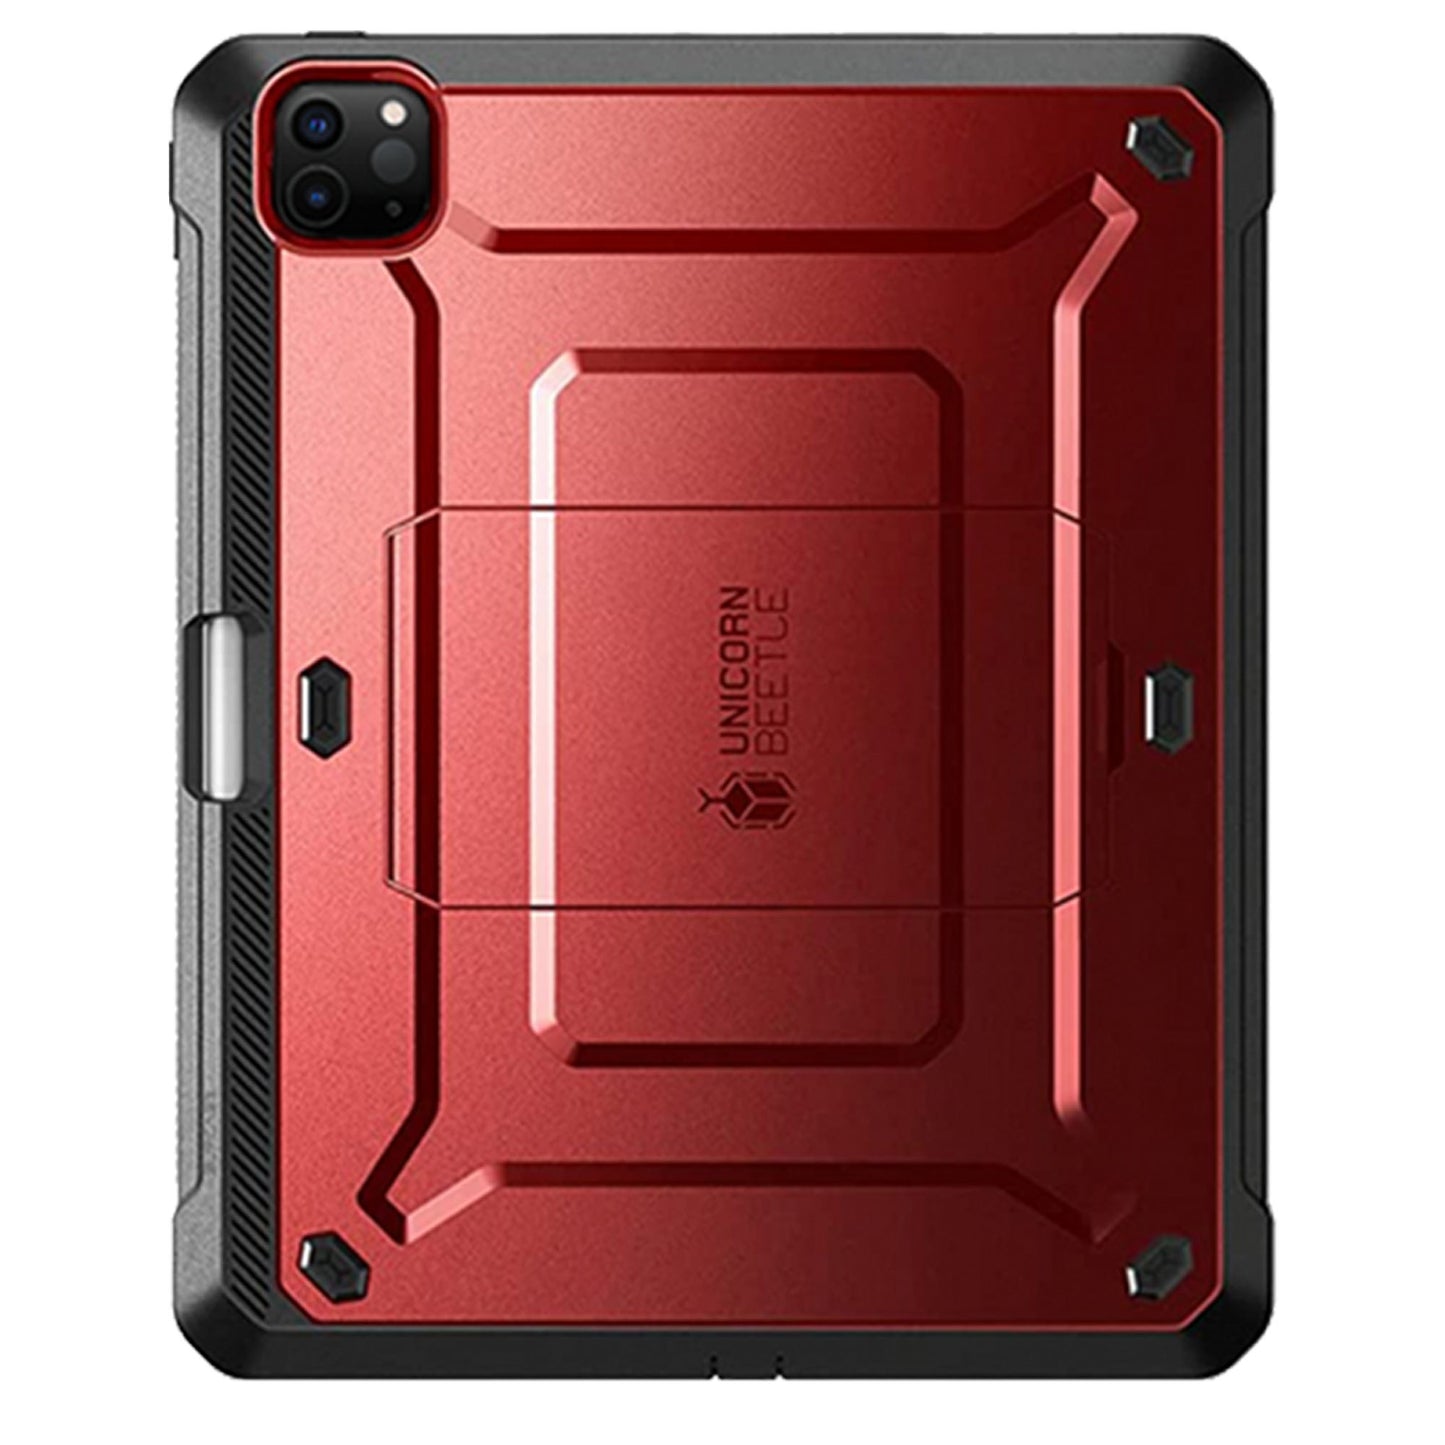 Supcase Unicorn Beetle UB PRO for iPad Pro 11" ( 2020 - 2022 ) - iPad Air 10.9" ( 5th Gen ) ( 2022 ) with Build-in Screen Protector & Apple Pencil Holder - Metallic Red